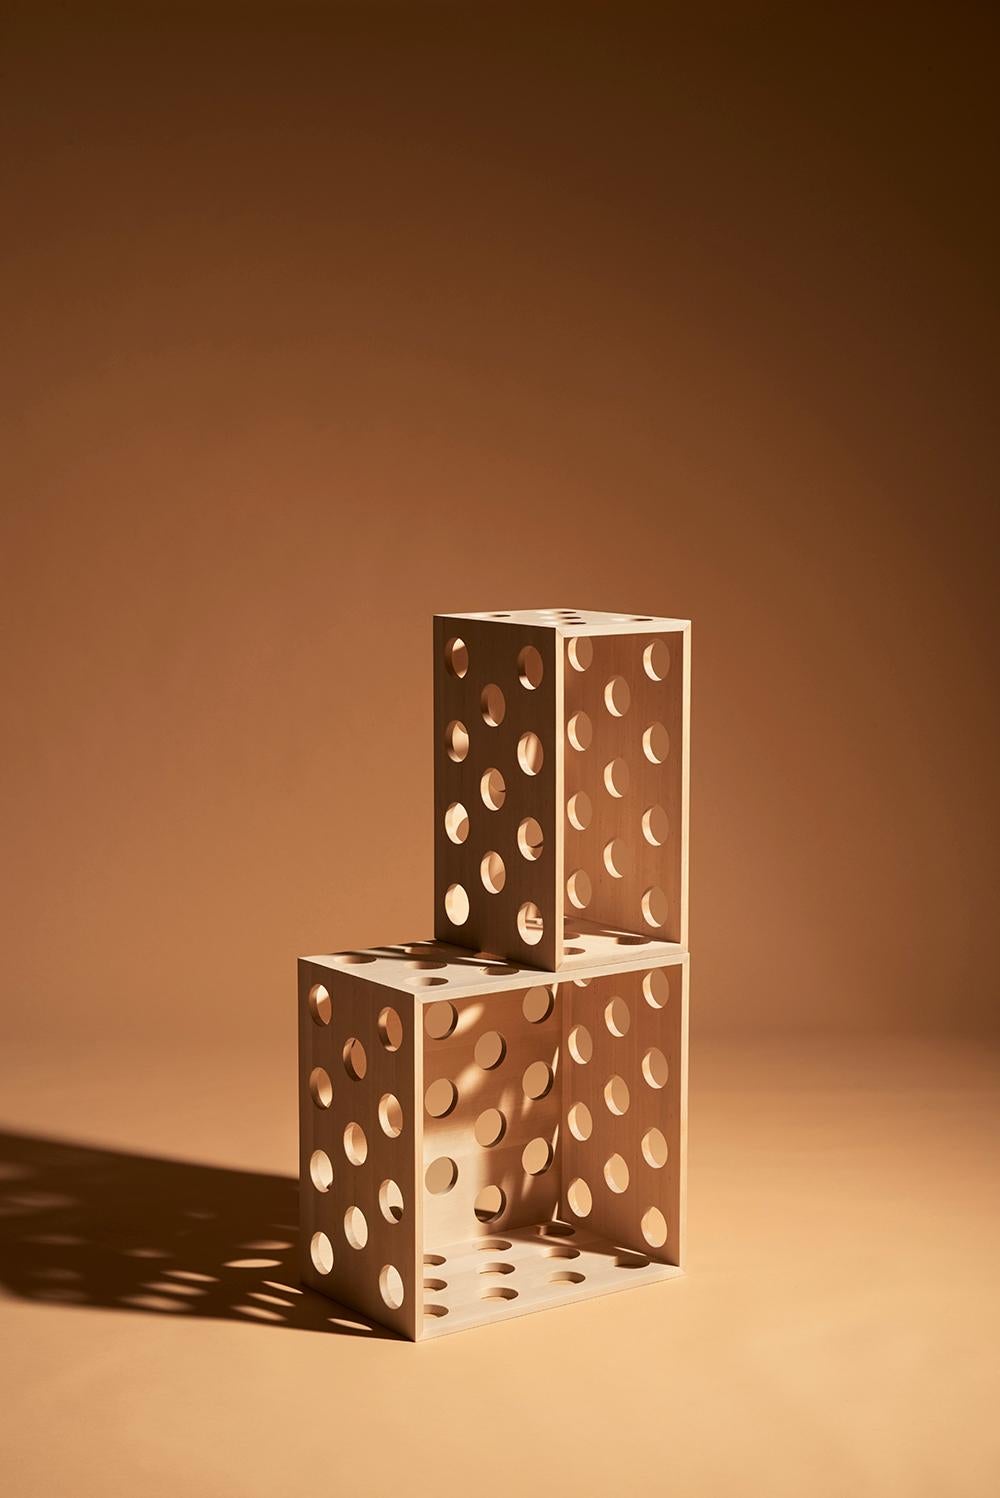 Contemporary Perforated Large Storage Box, Solid Birch Wood Perforated Box by Erik Olovsson For Sale